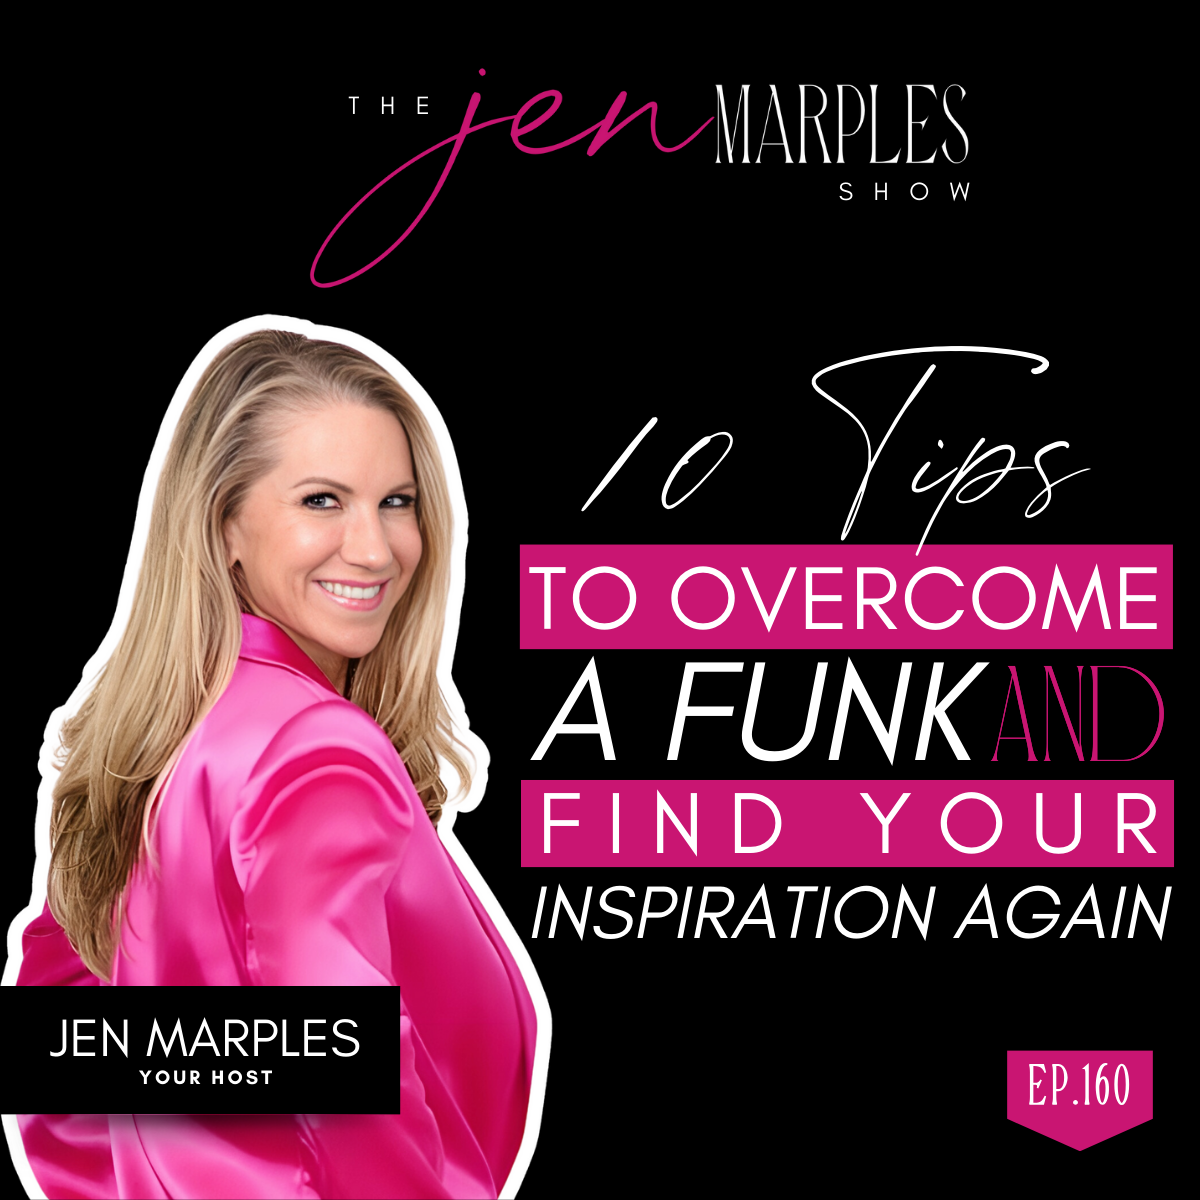 10 Tips to Overcome a Funk and Find Your Inspiration Again with Jen